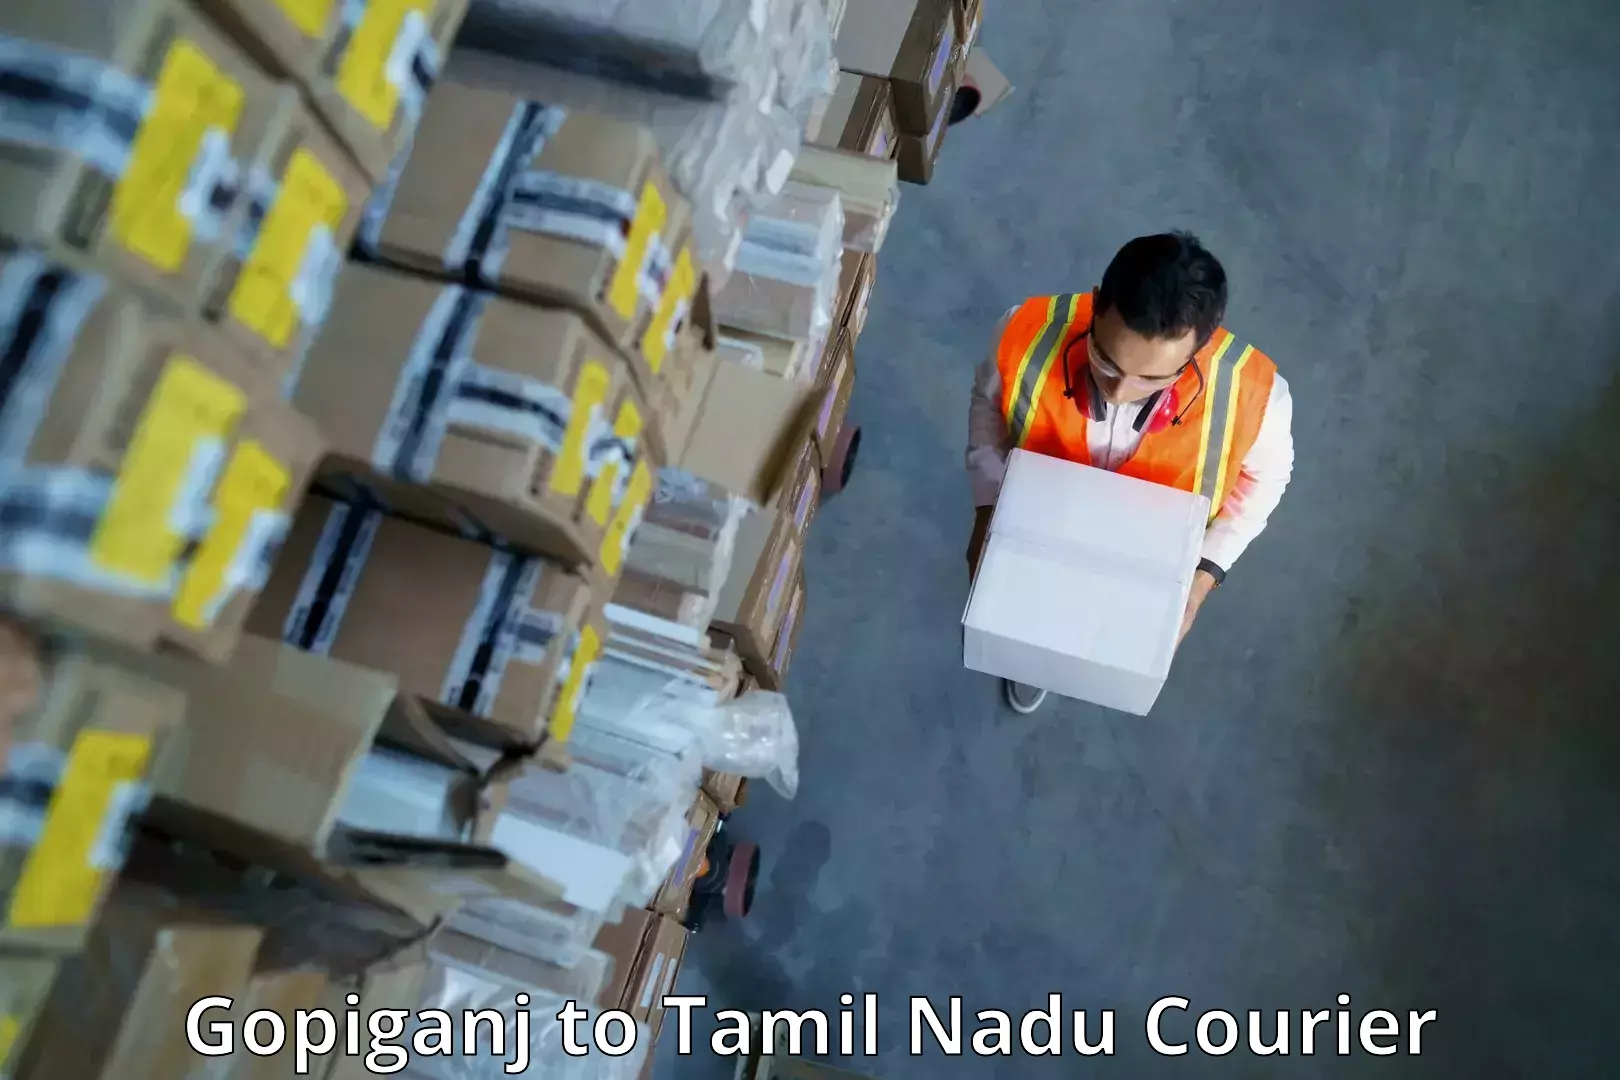 Global shipping networks Gopiganj to Trichy